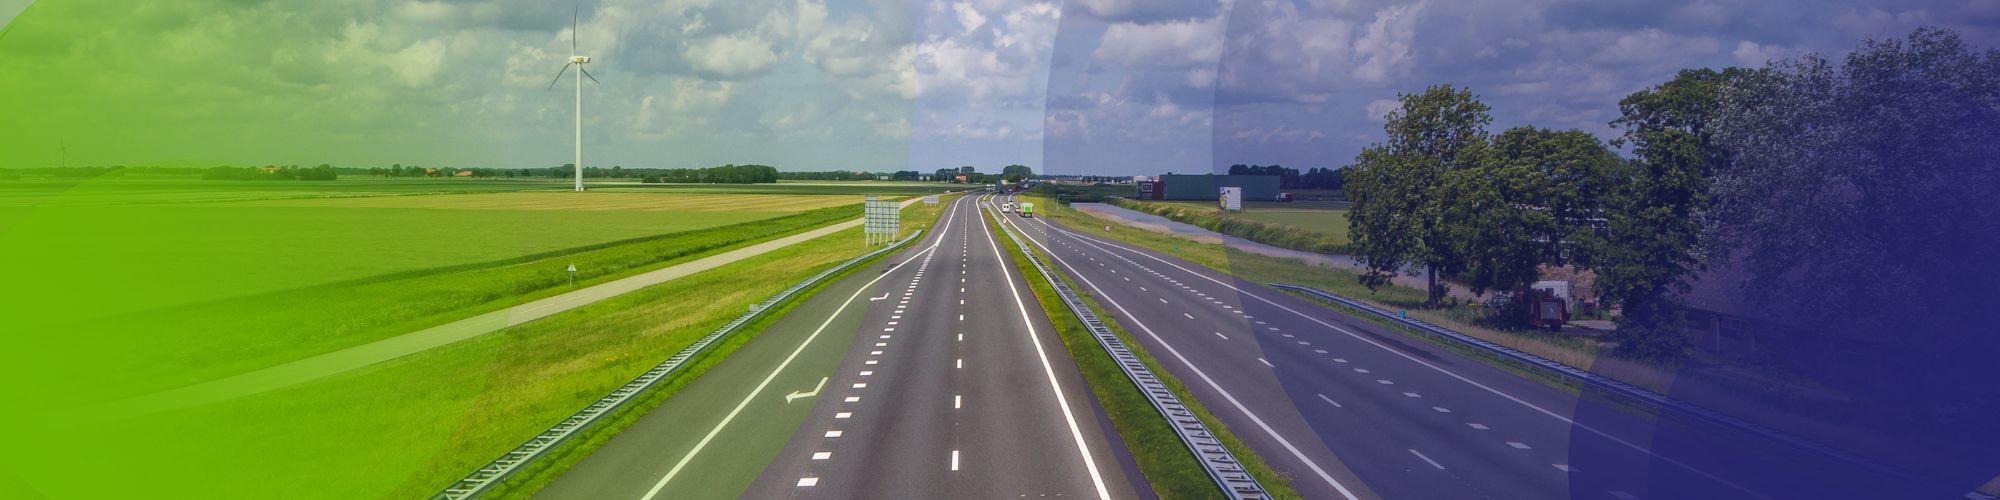 National Highways Establishes Dedicated Division for Environmental Sustainability